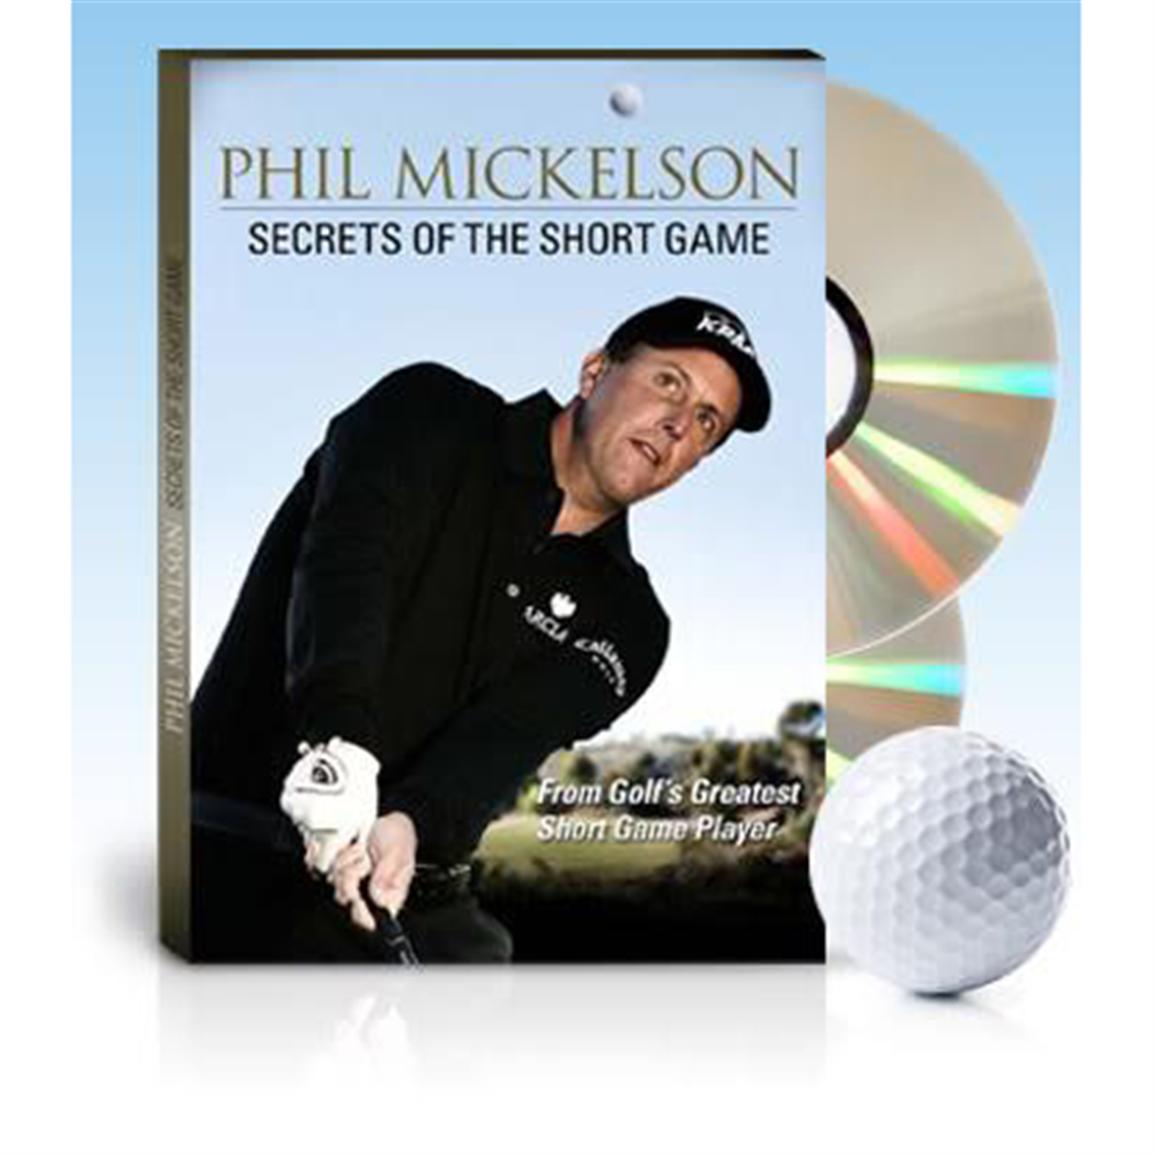 phil mickelson secrets of the short game download free